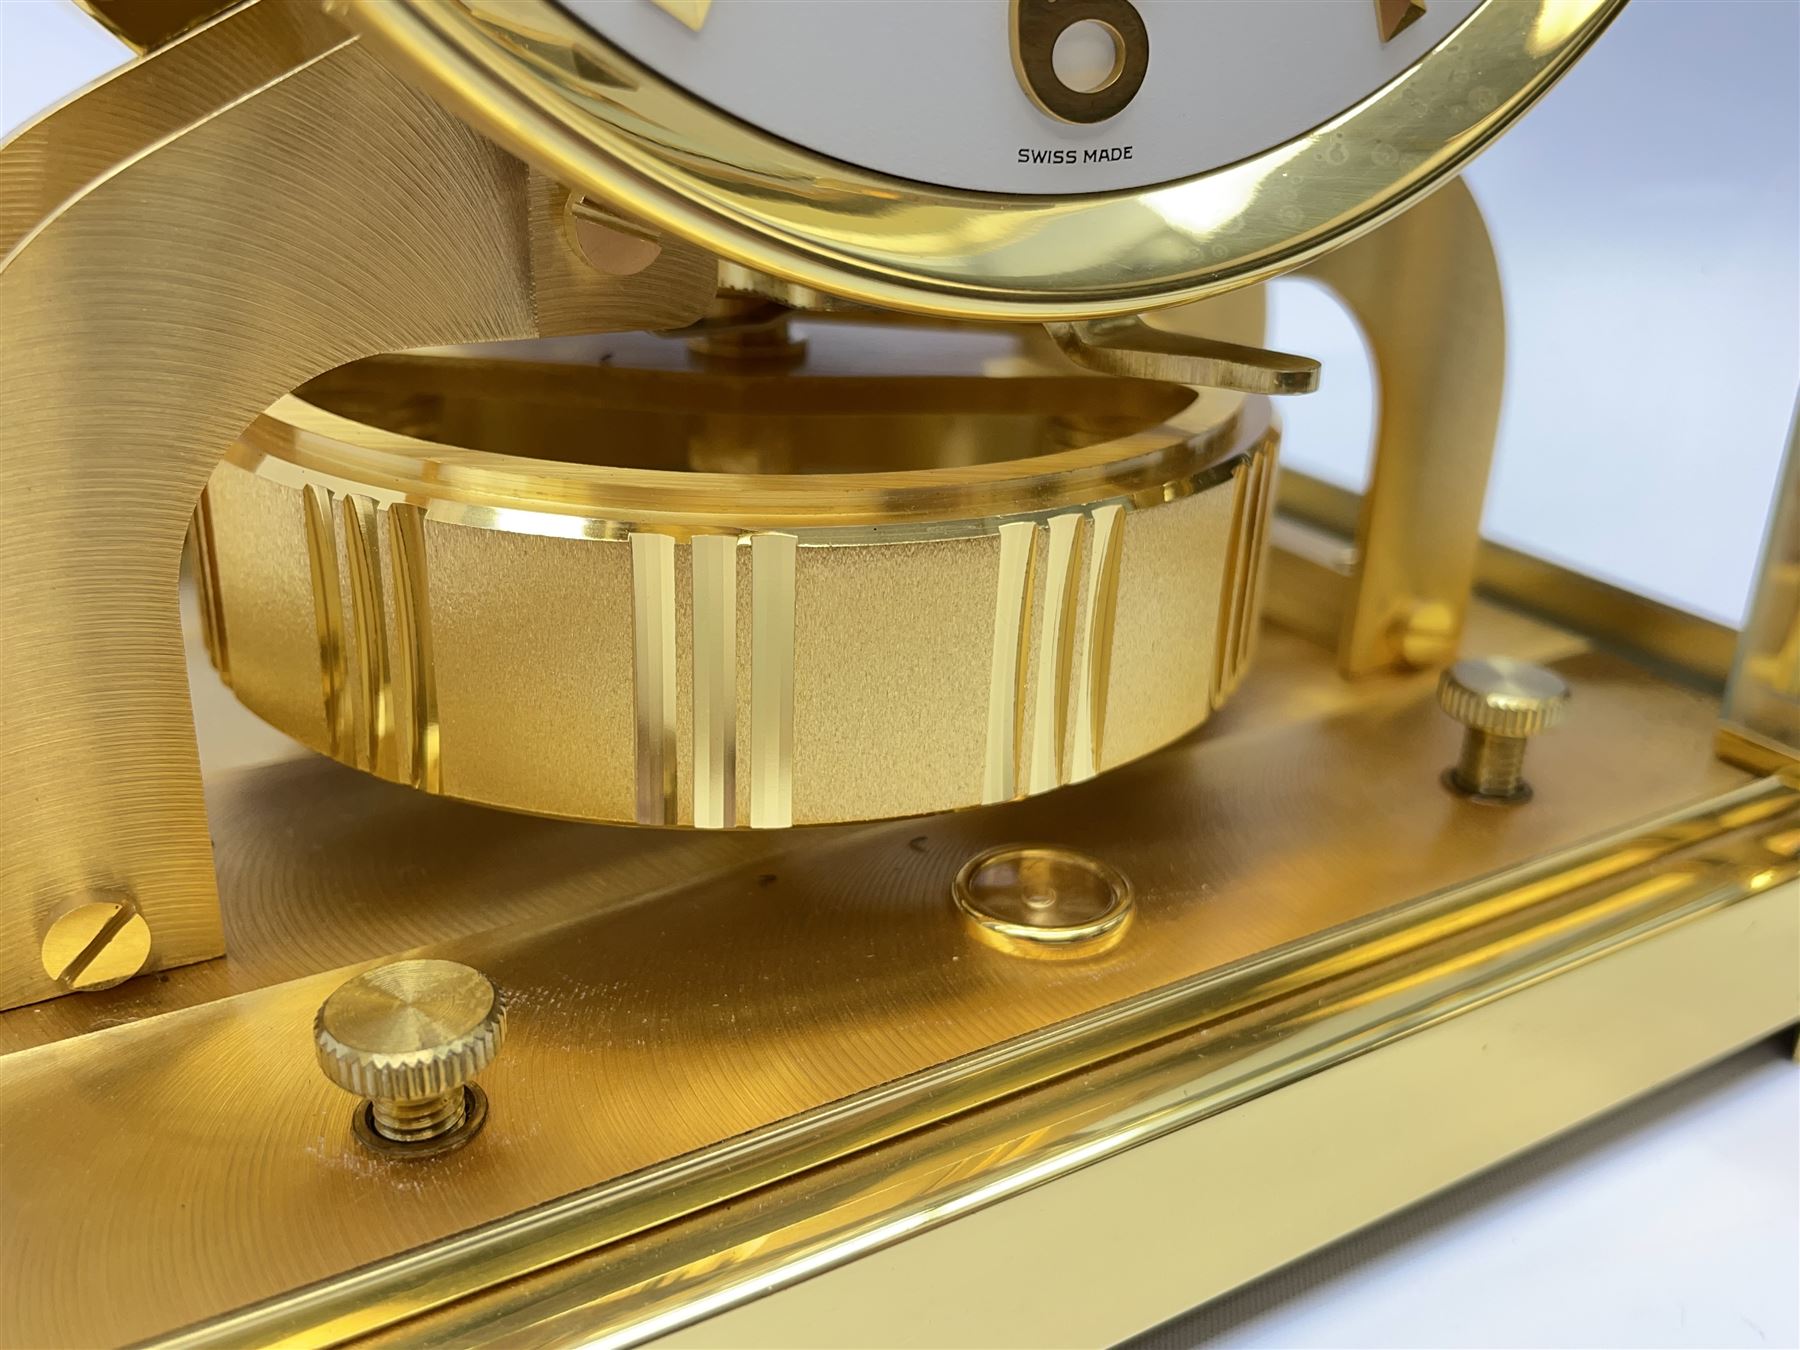 Jaeger-LeCoultre Atmos timepiece clock - Image 4 of 8